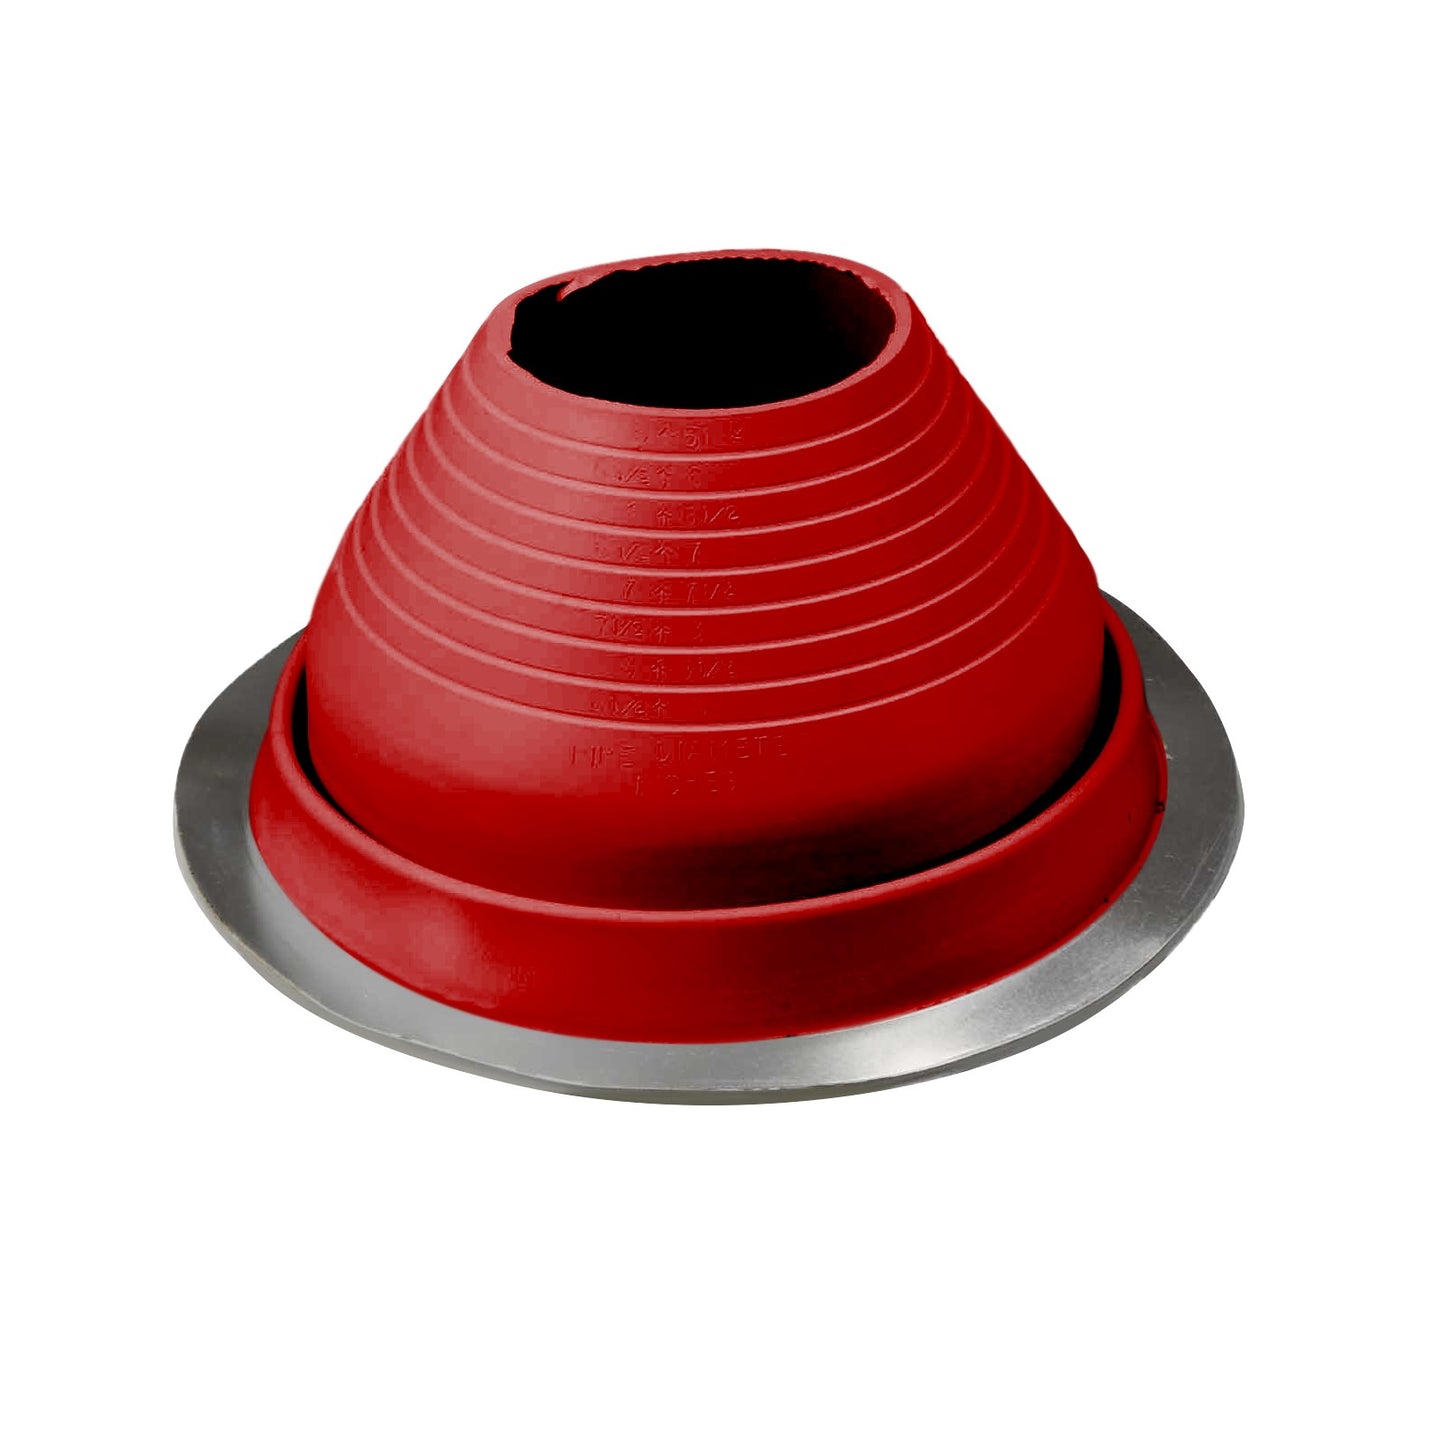 #6 Roofjack Round EPDM Pipe Flashing Boot Bright Red